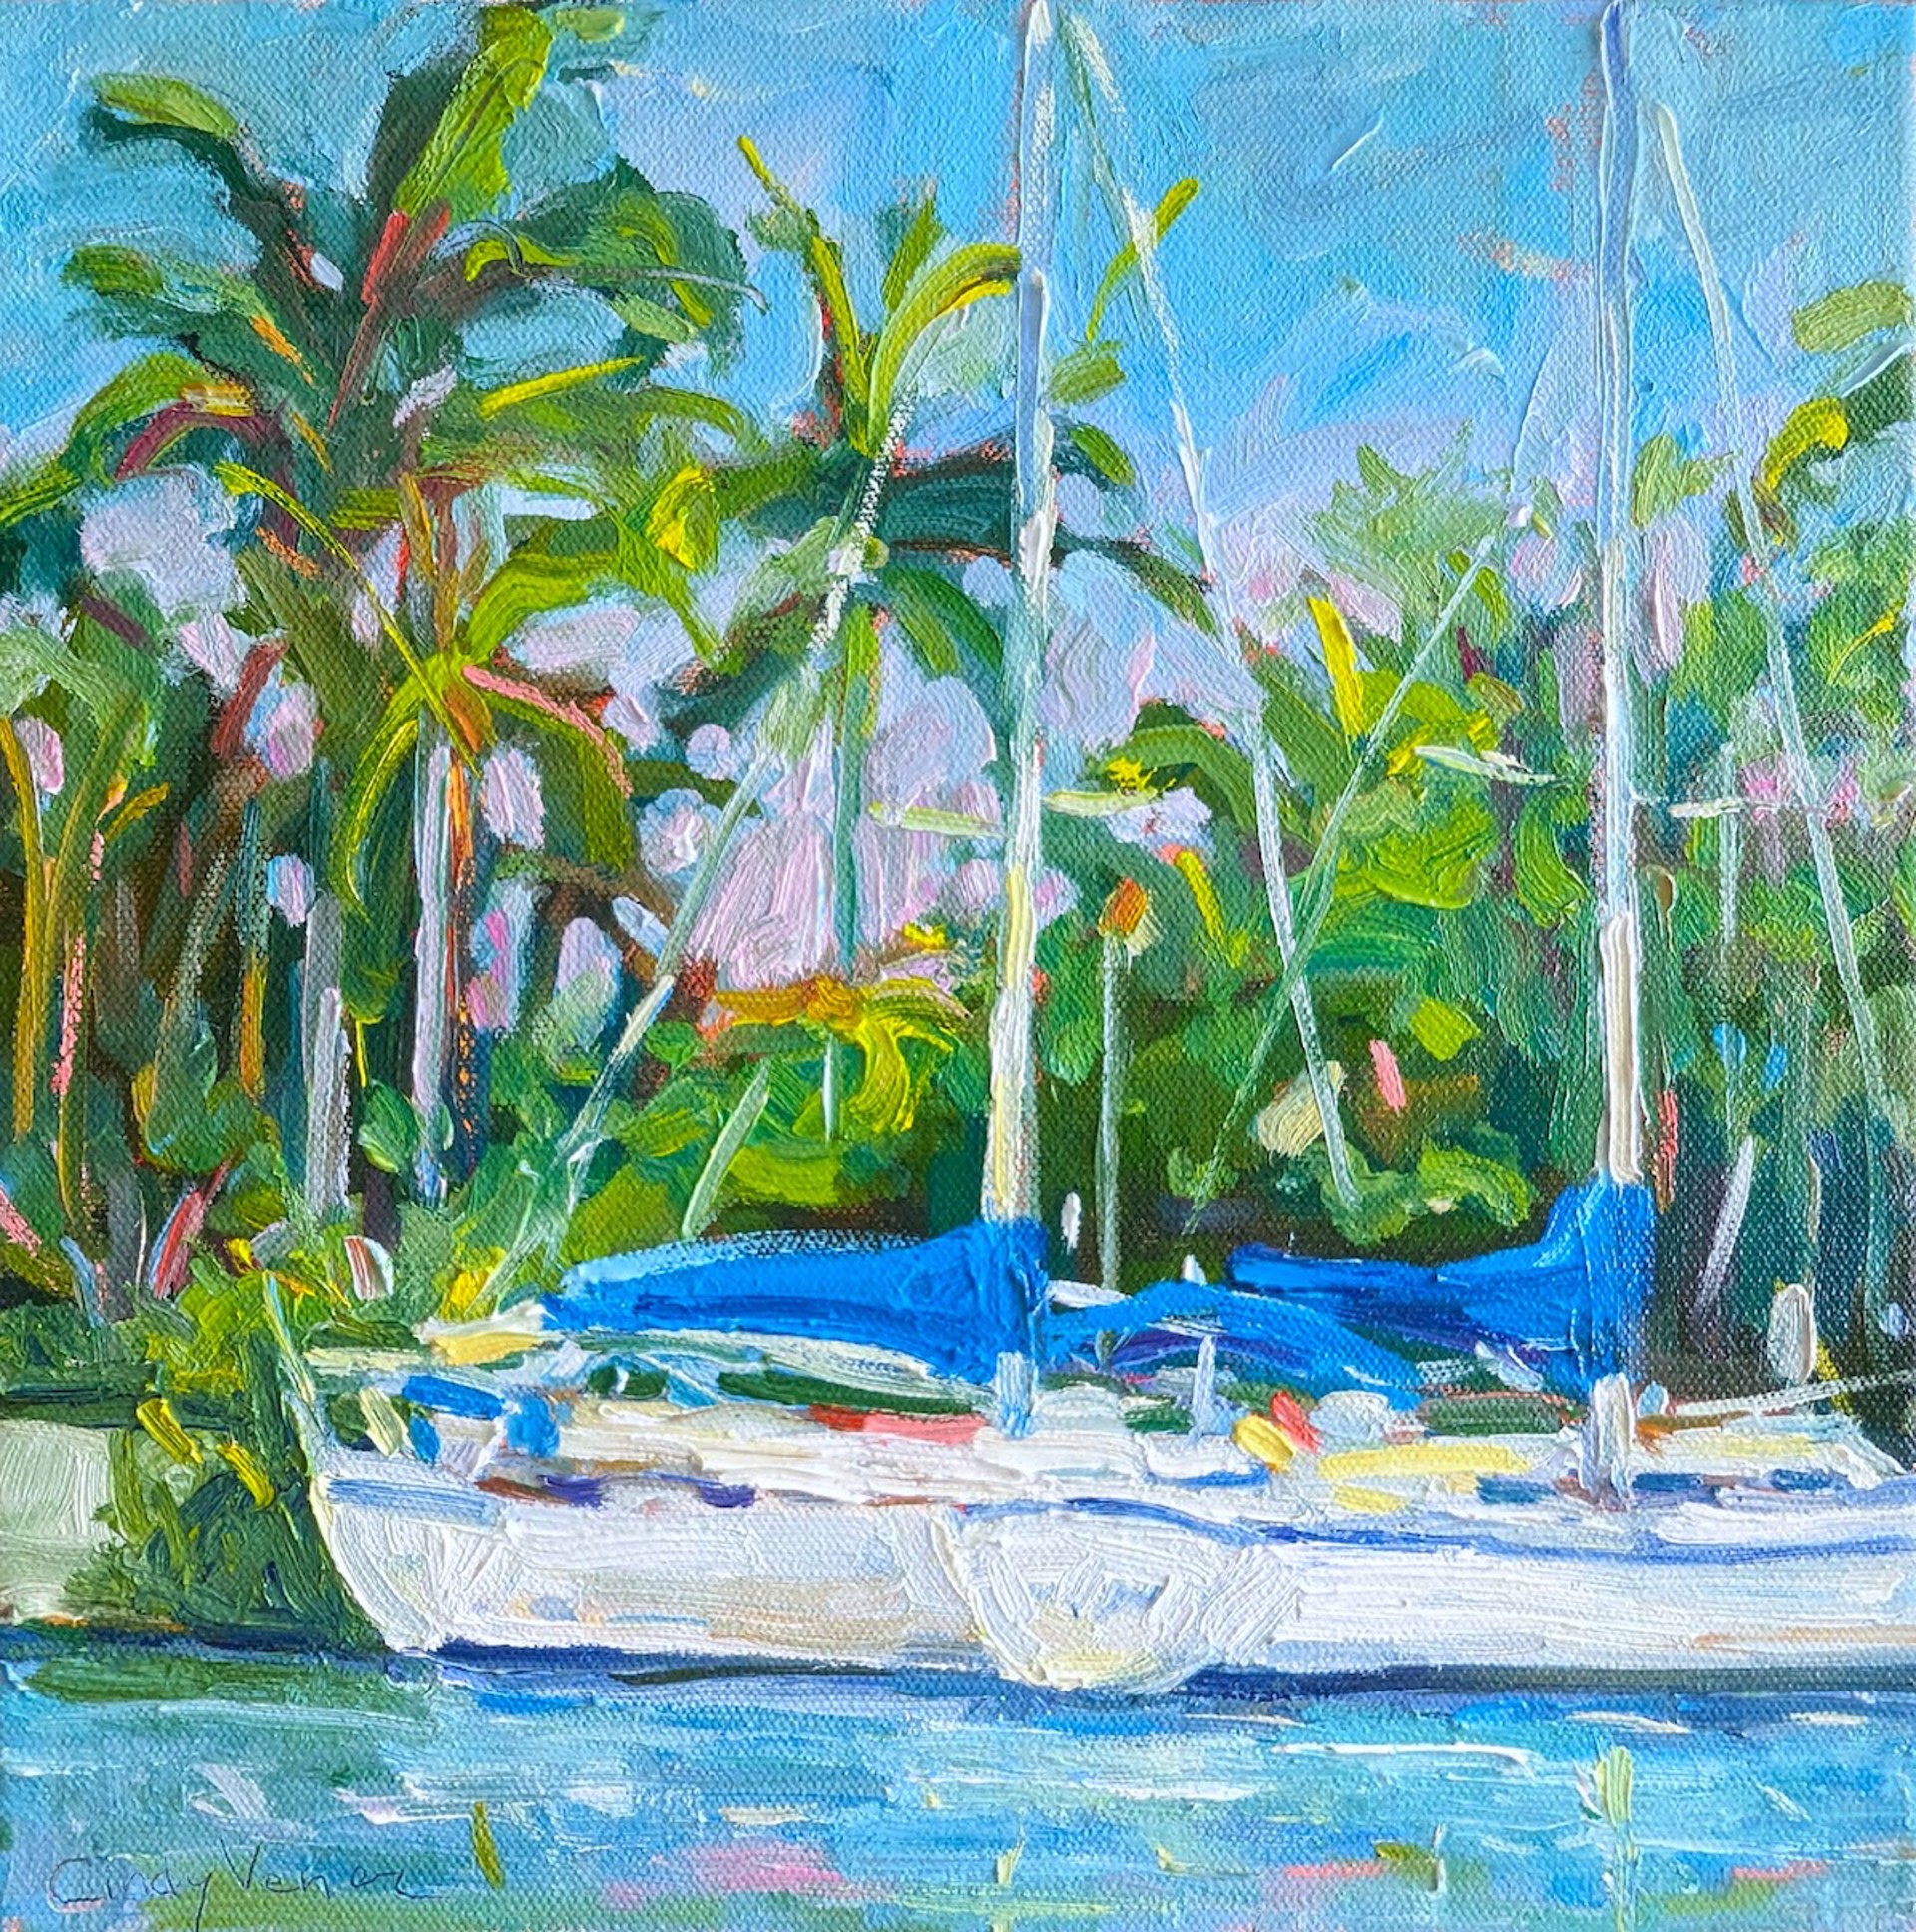 Moored on the Bay by Cindy Vener